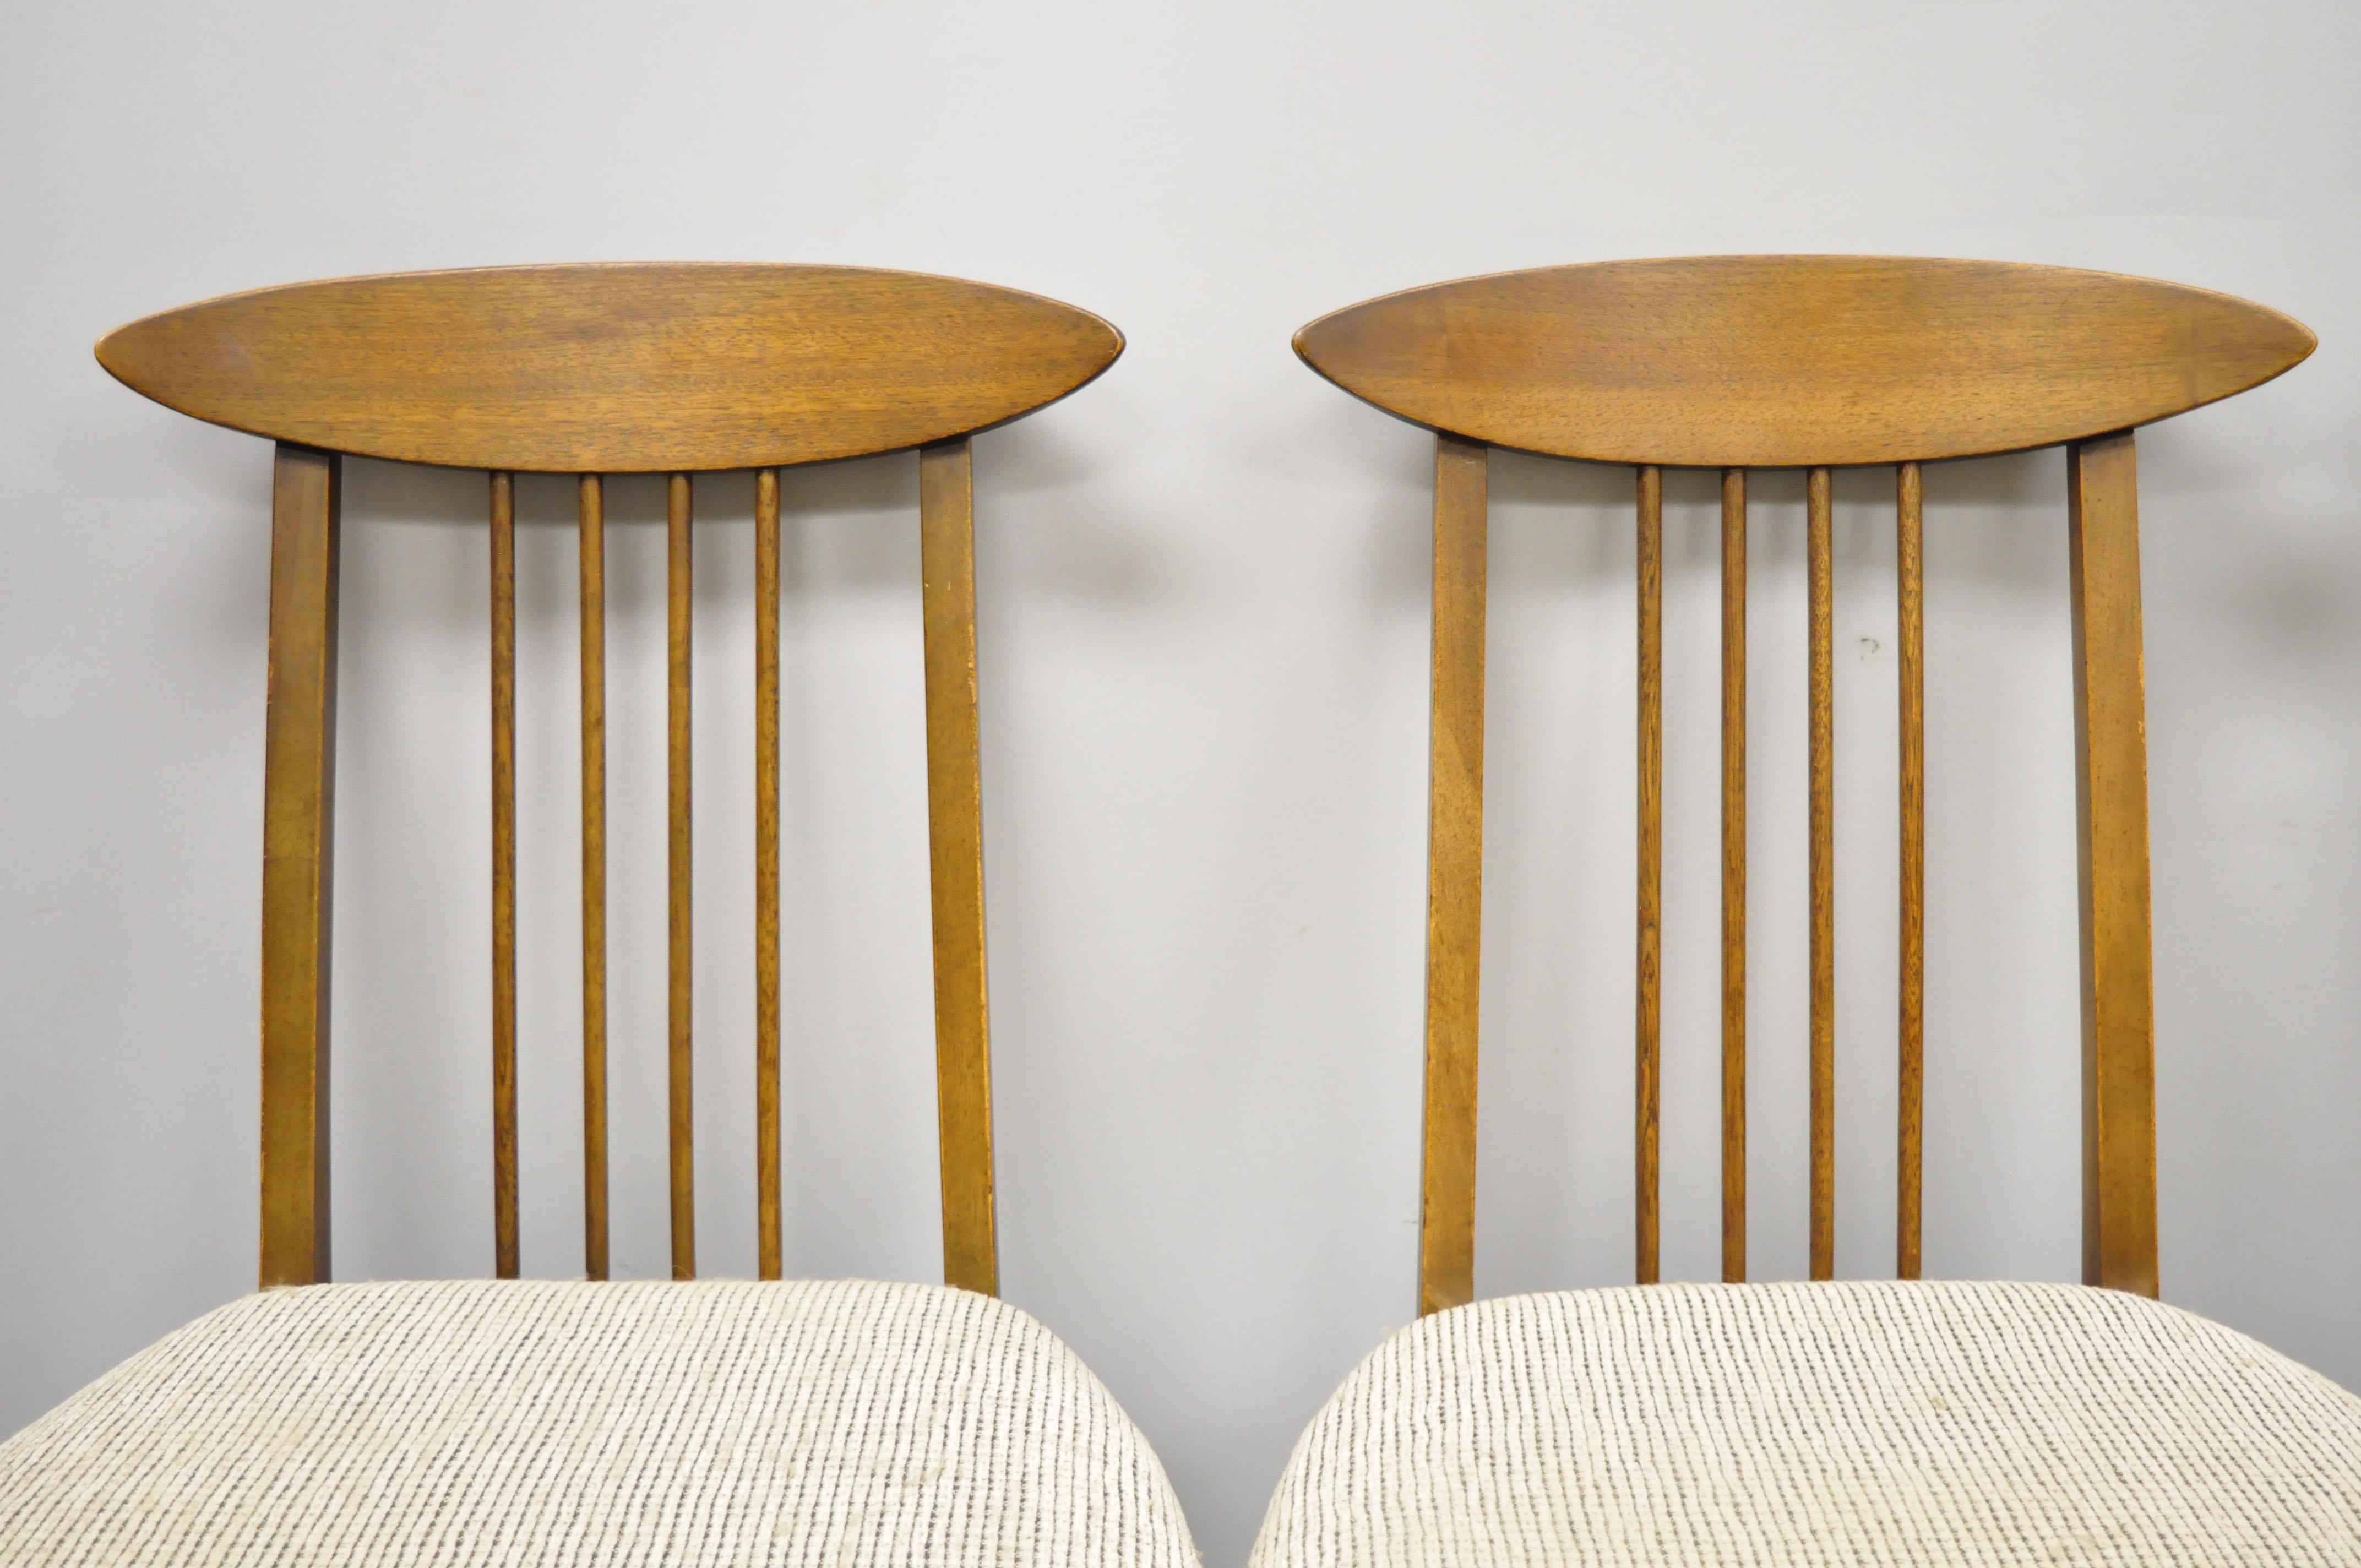 American Set of Four Vintage Mid-Century Modern Walnut Spindle Back Dining Chairs